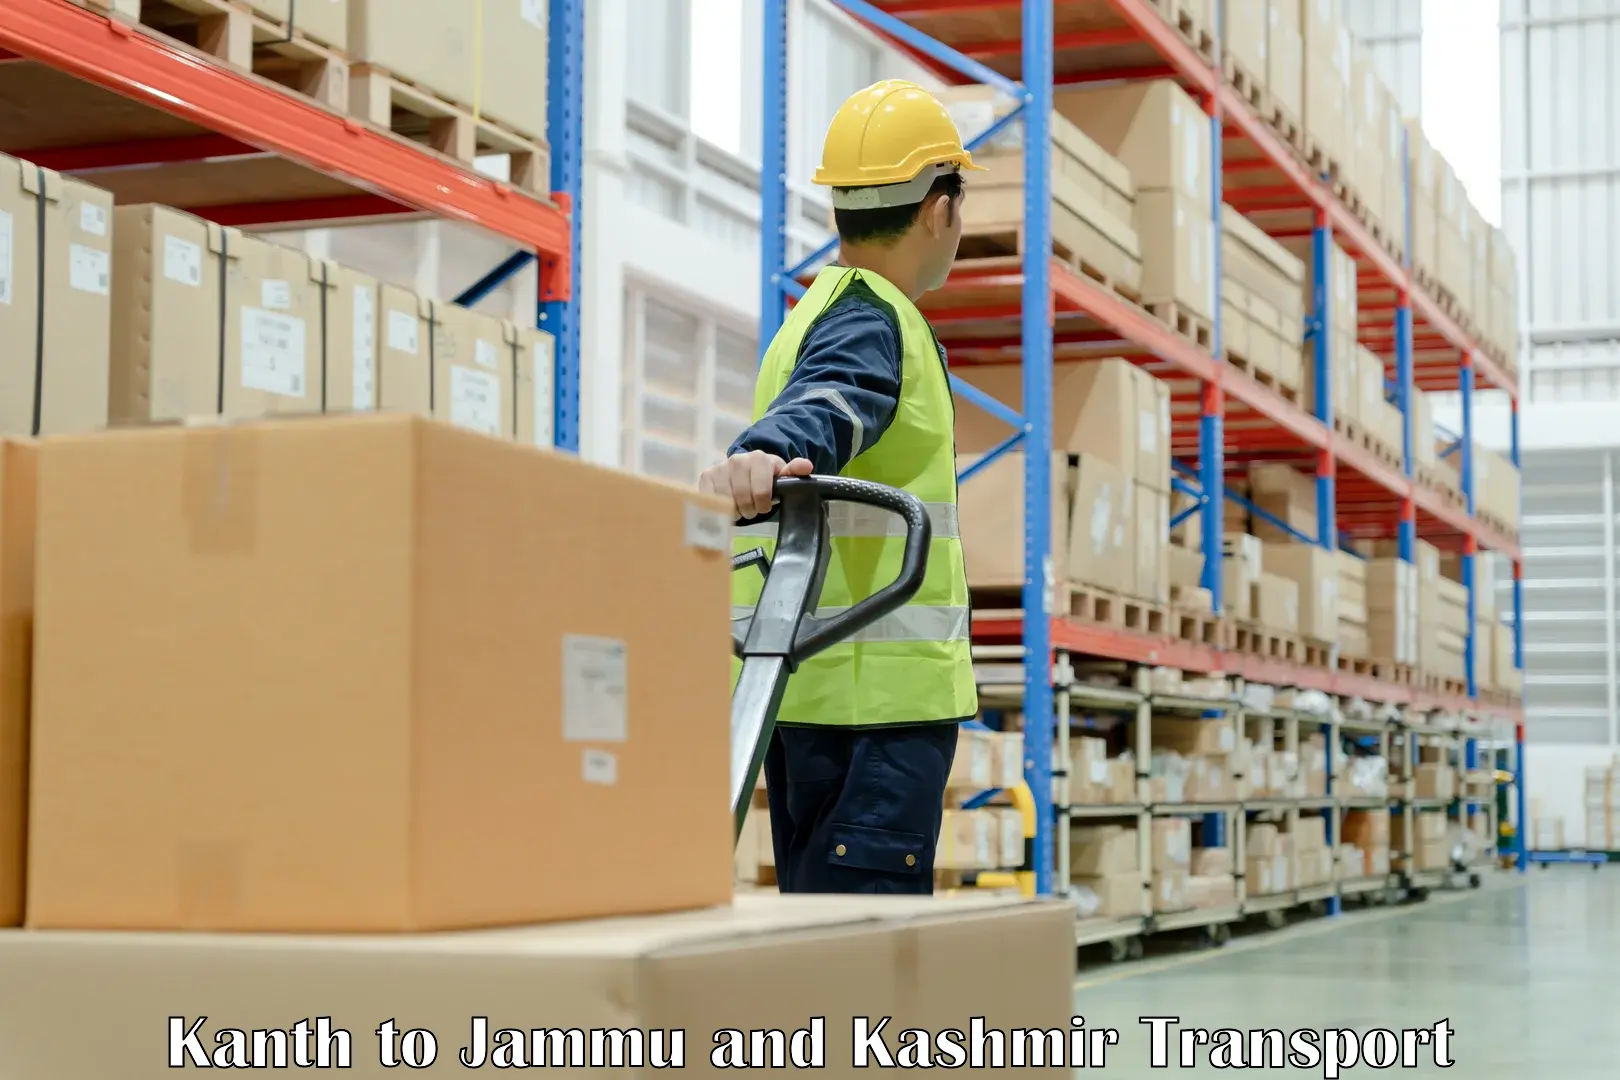 India truck logistics services Kanth to Jammu and Kashmir